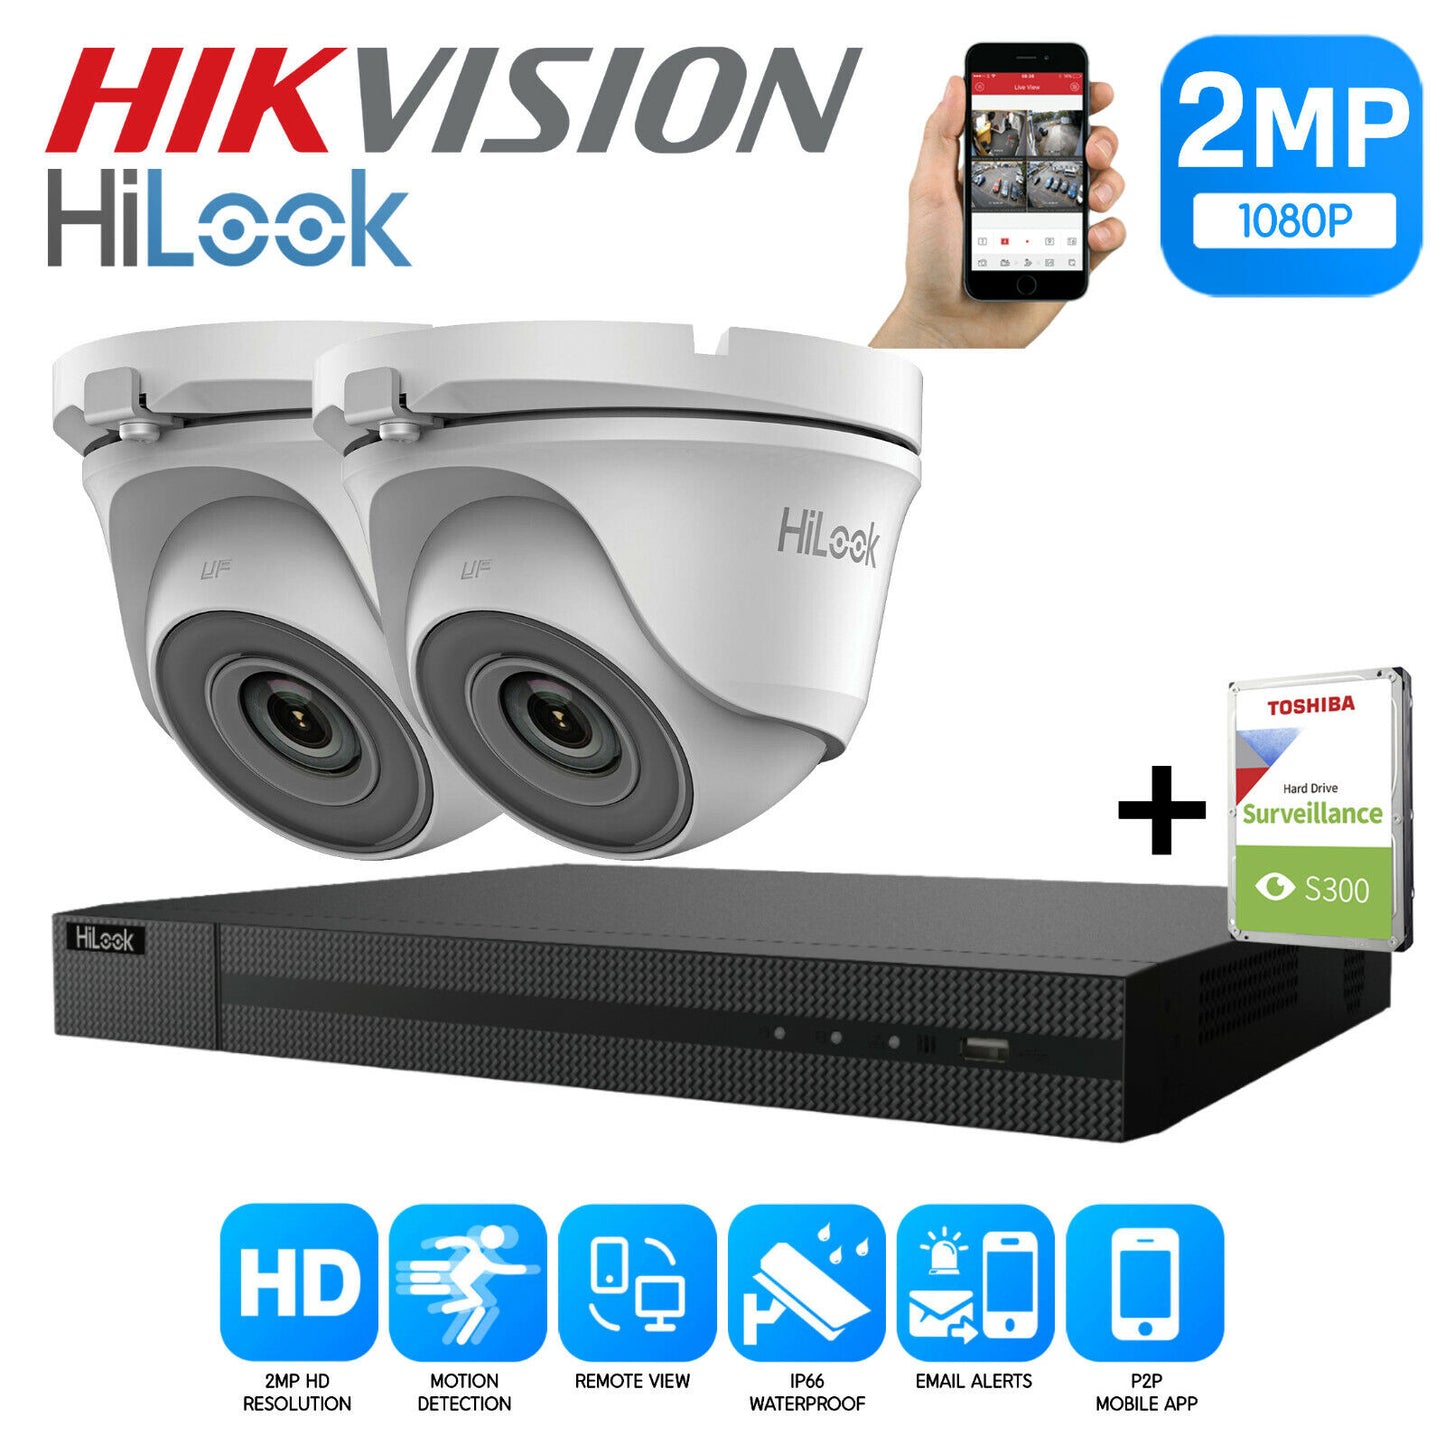 HIKVISION HILOOK CCTV SYSTEM KIT 4CH DVR 2MP TURRET CAMERA DAY/NIGHT UK 4CH DVR 2xCameras (white) 2TB HDD